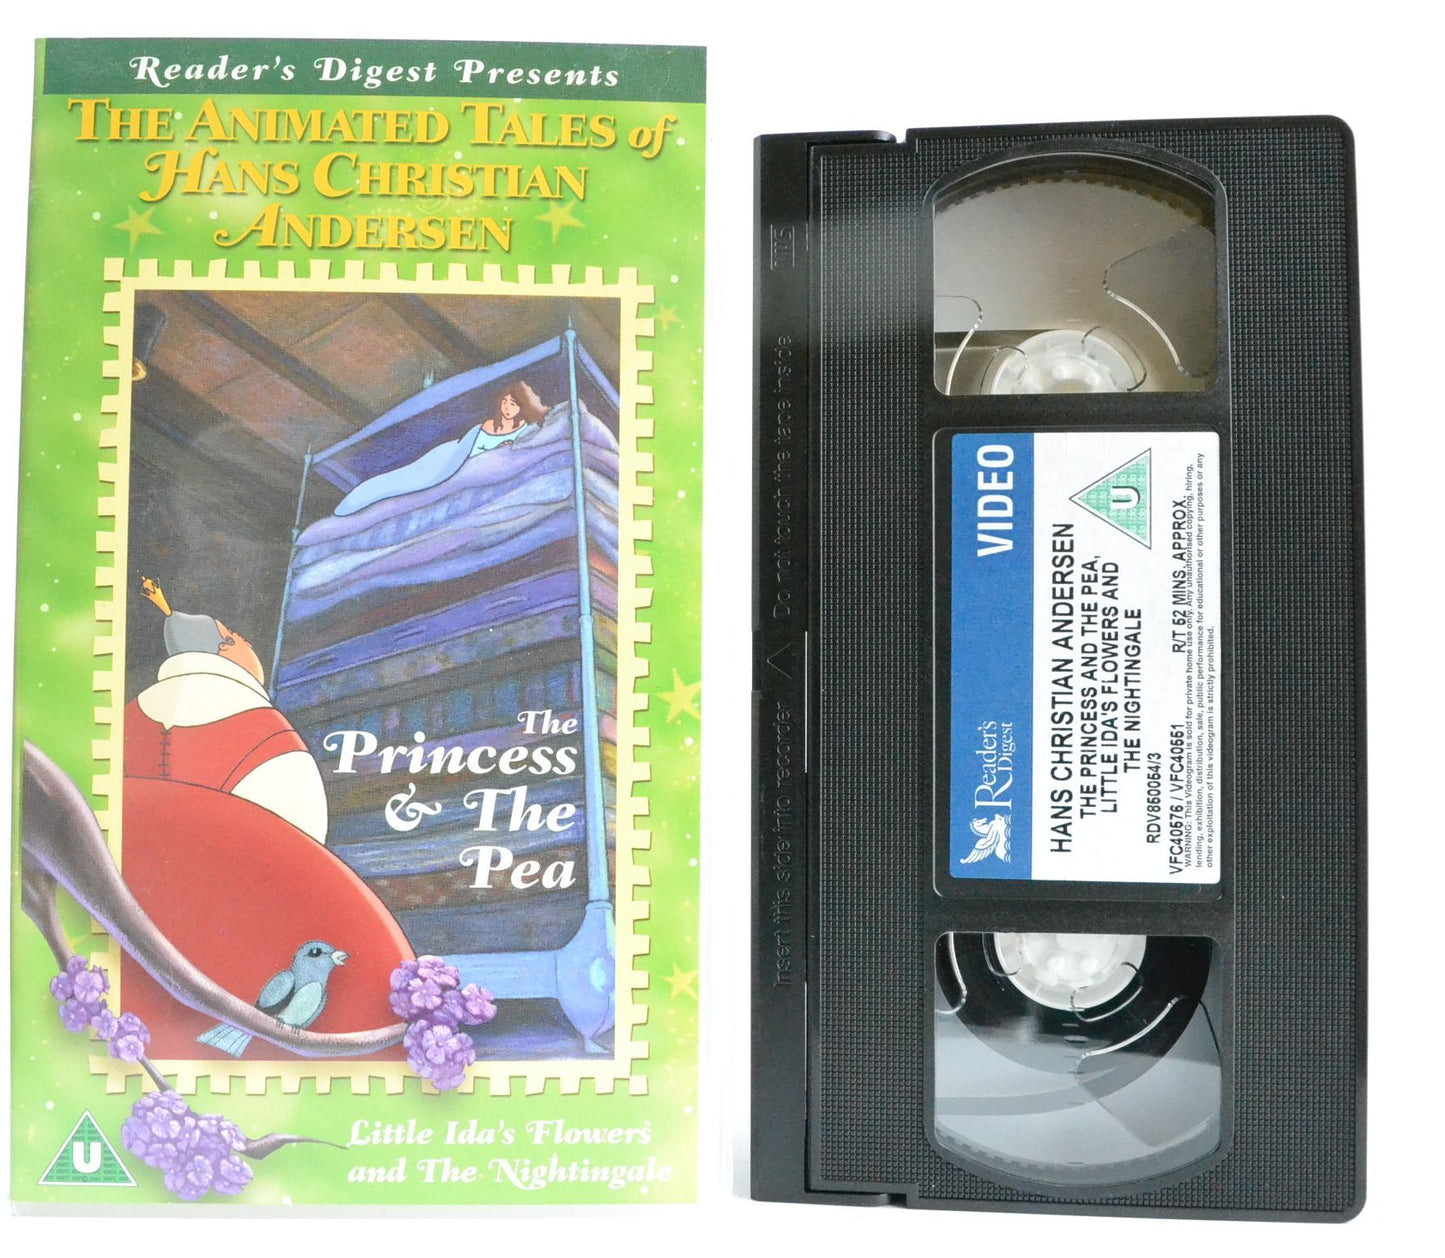 The Princess And The Pea - Little Ida’s Flowers - The Nightingale [Animation] VHS-